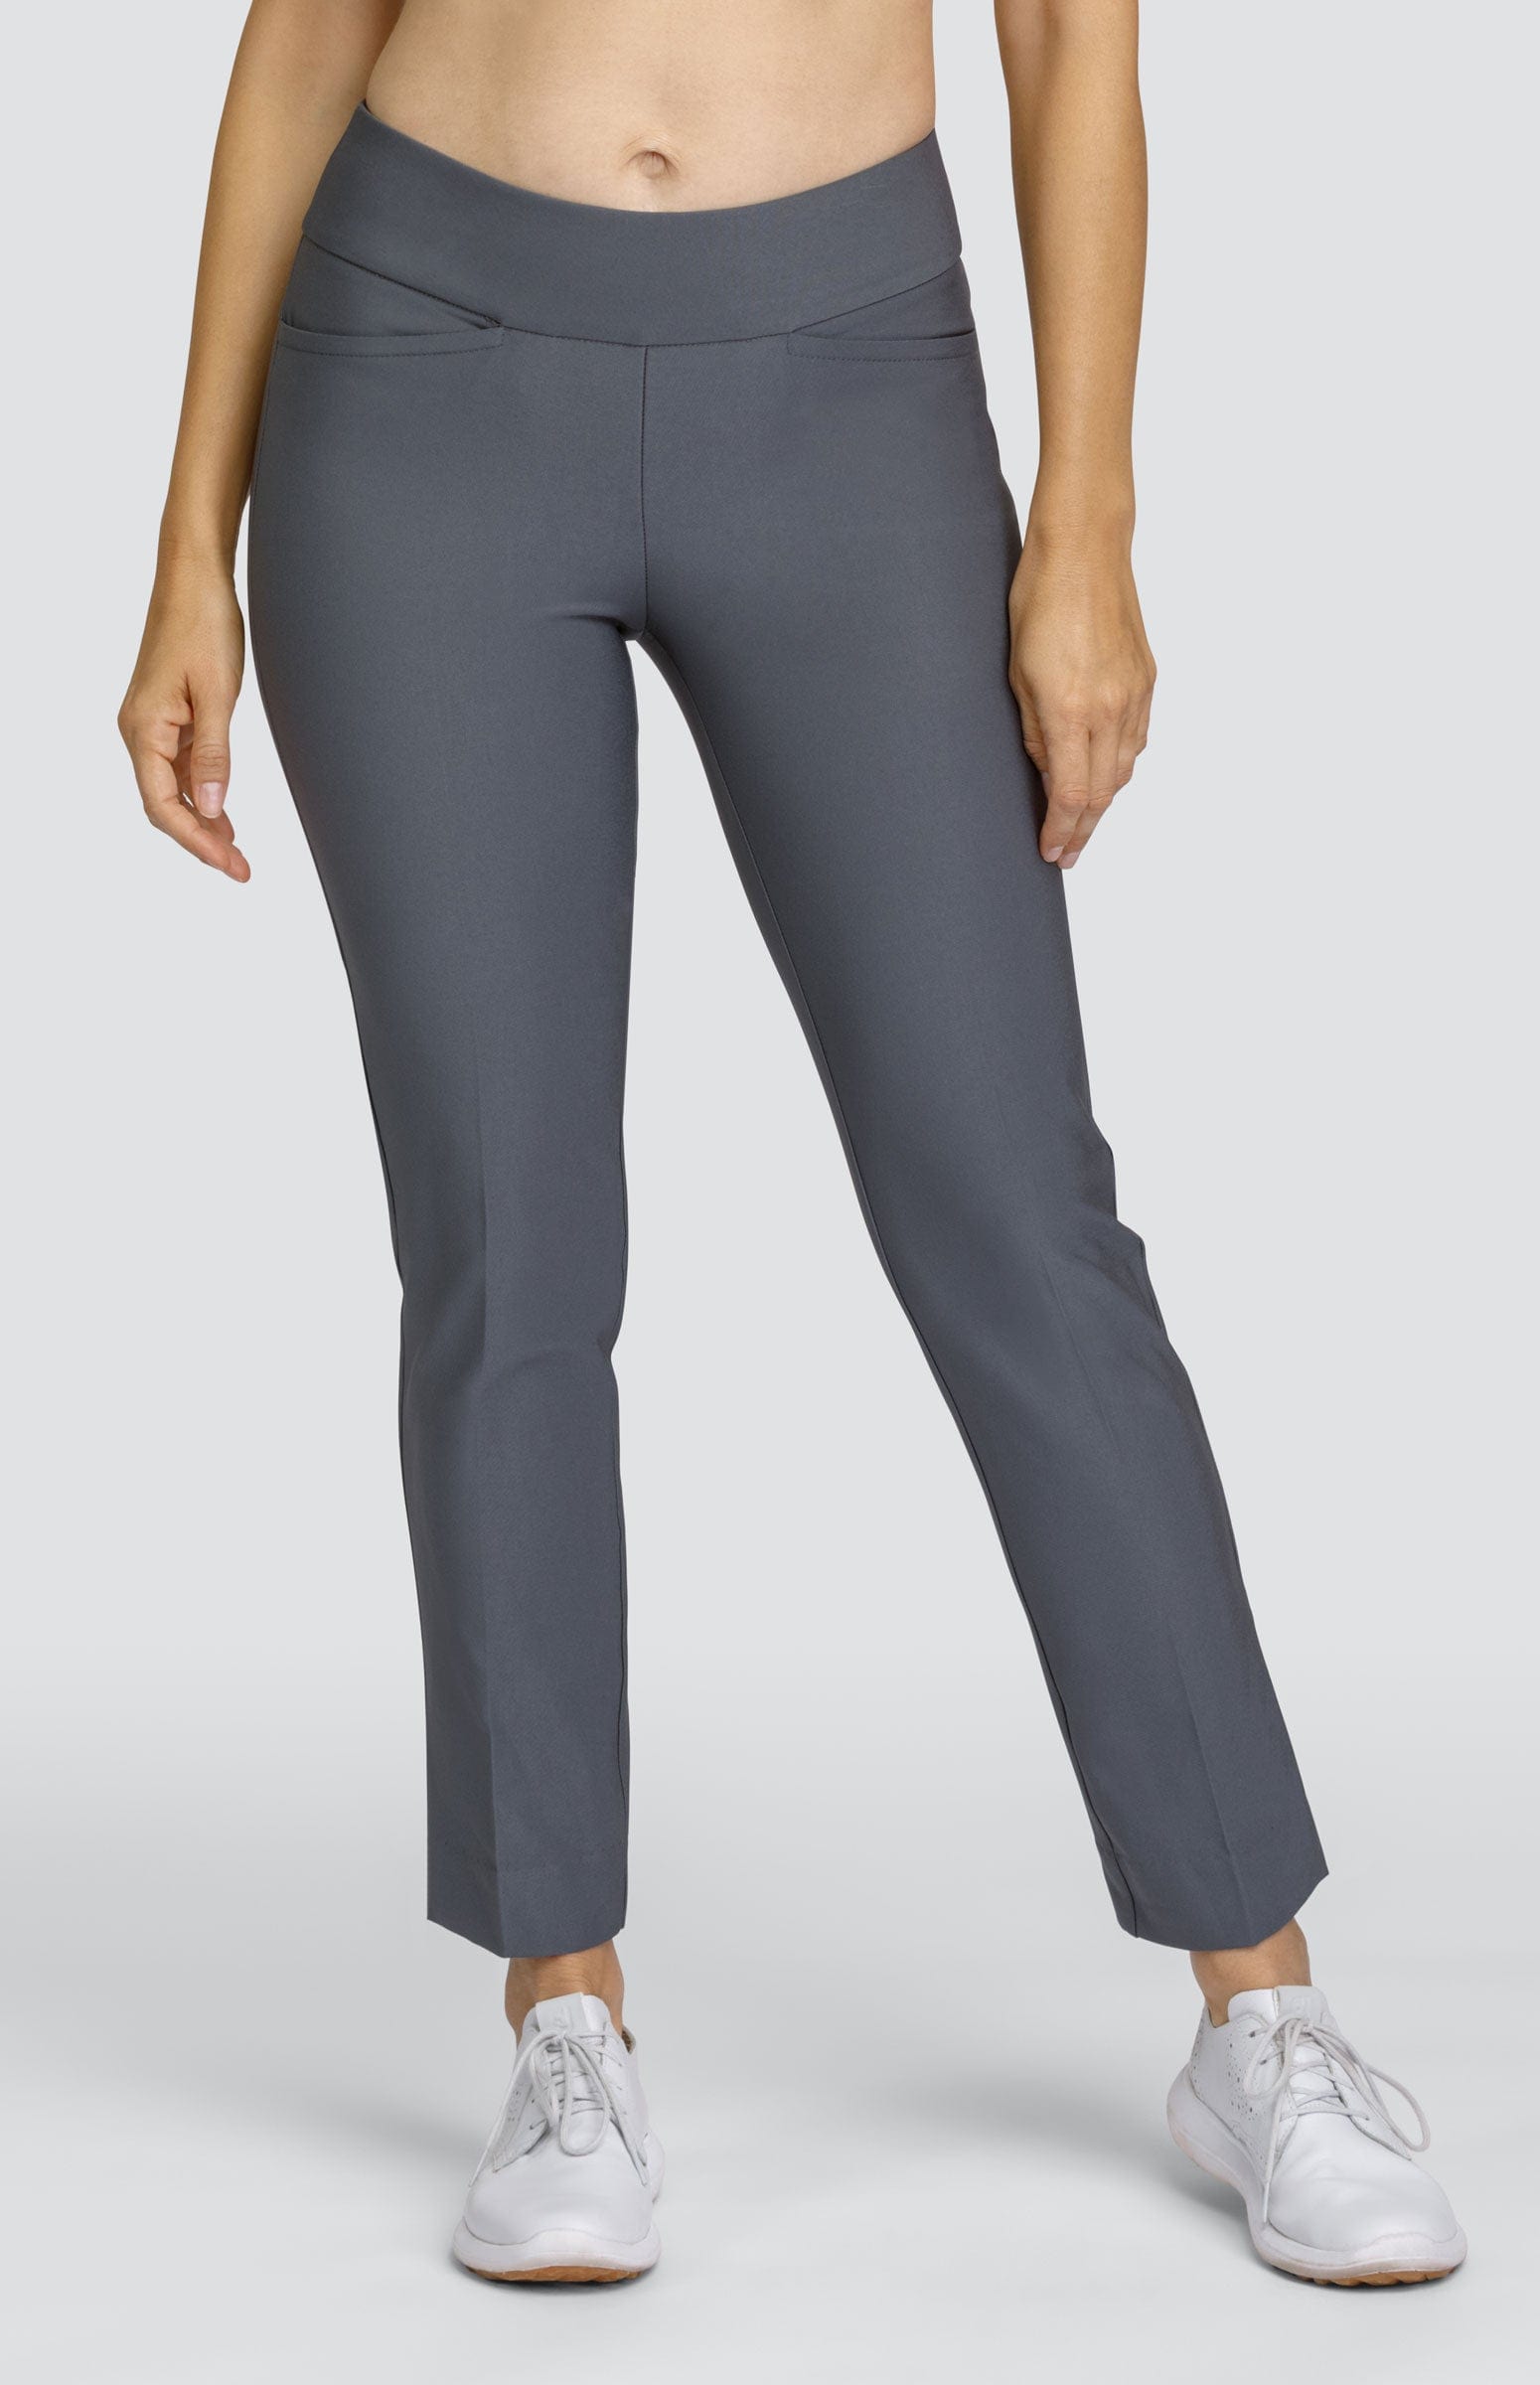 Mulligan 28" Ankle Pant - Ace Gray